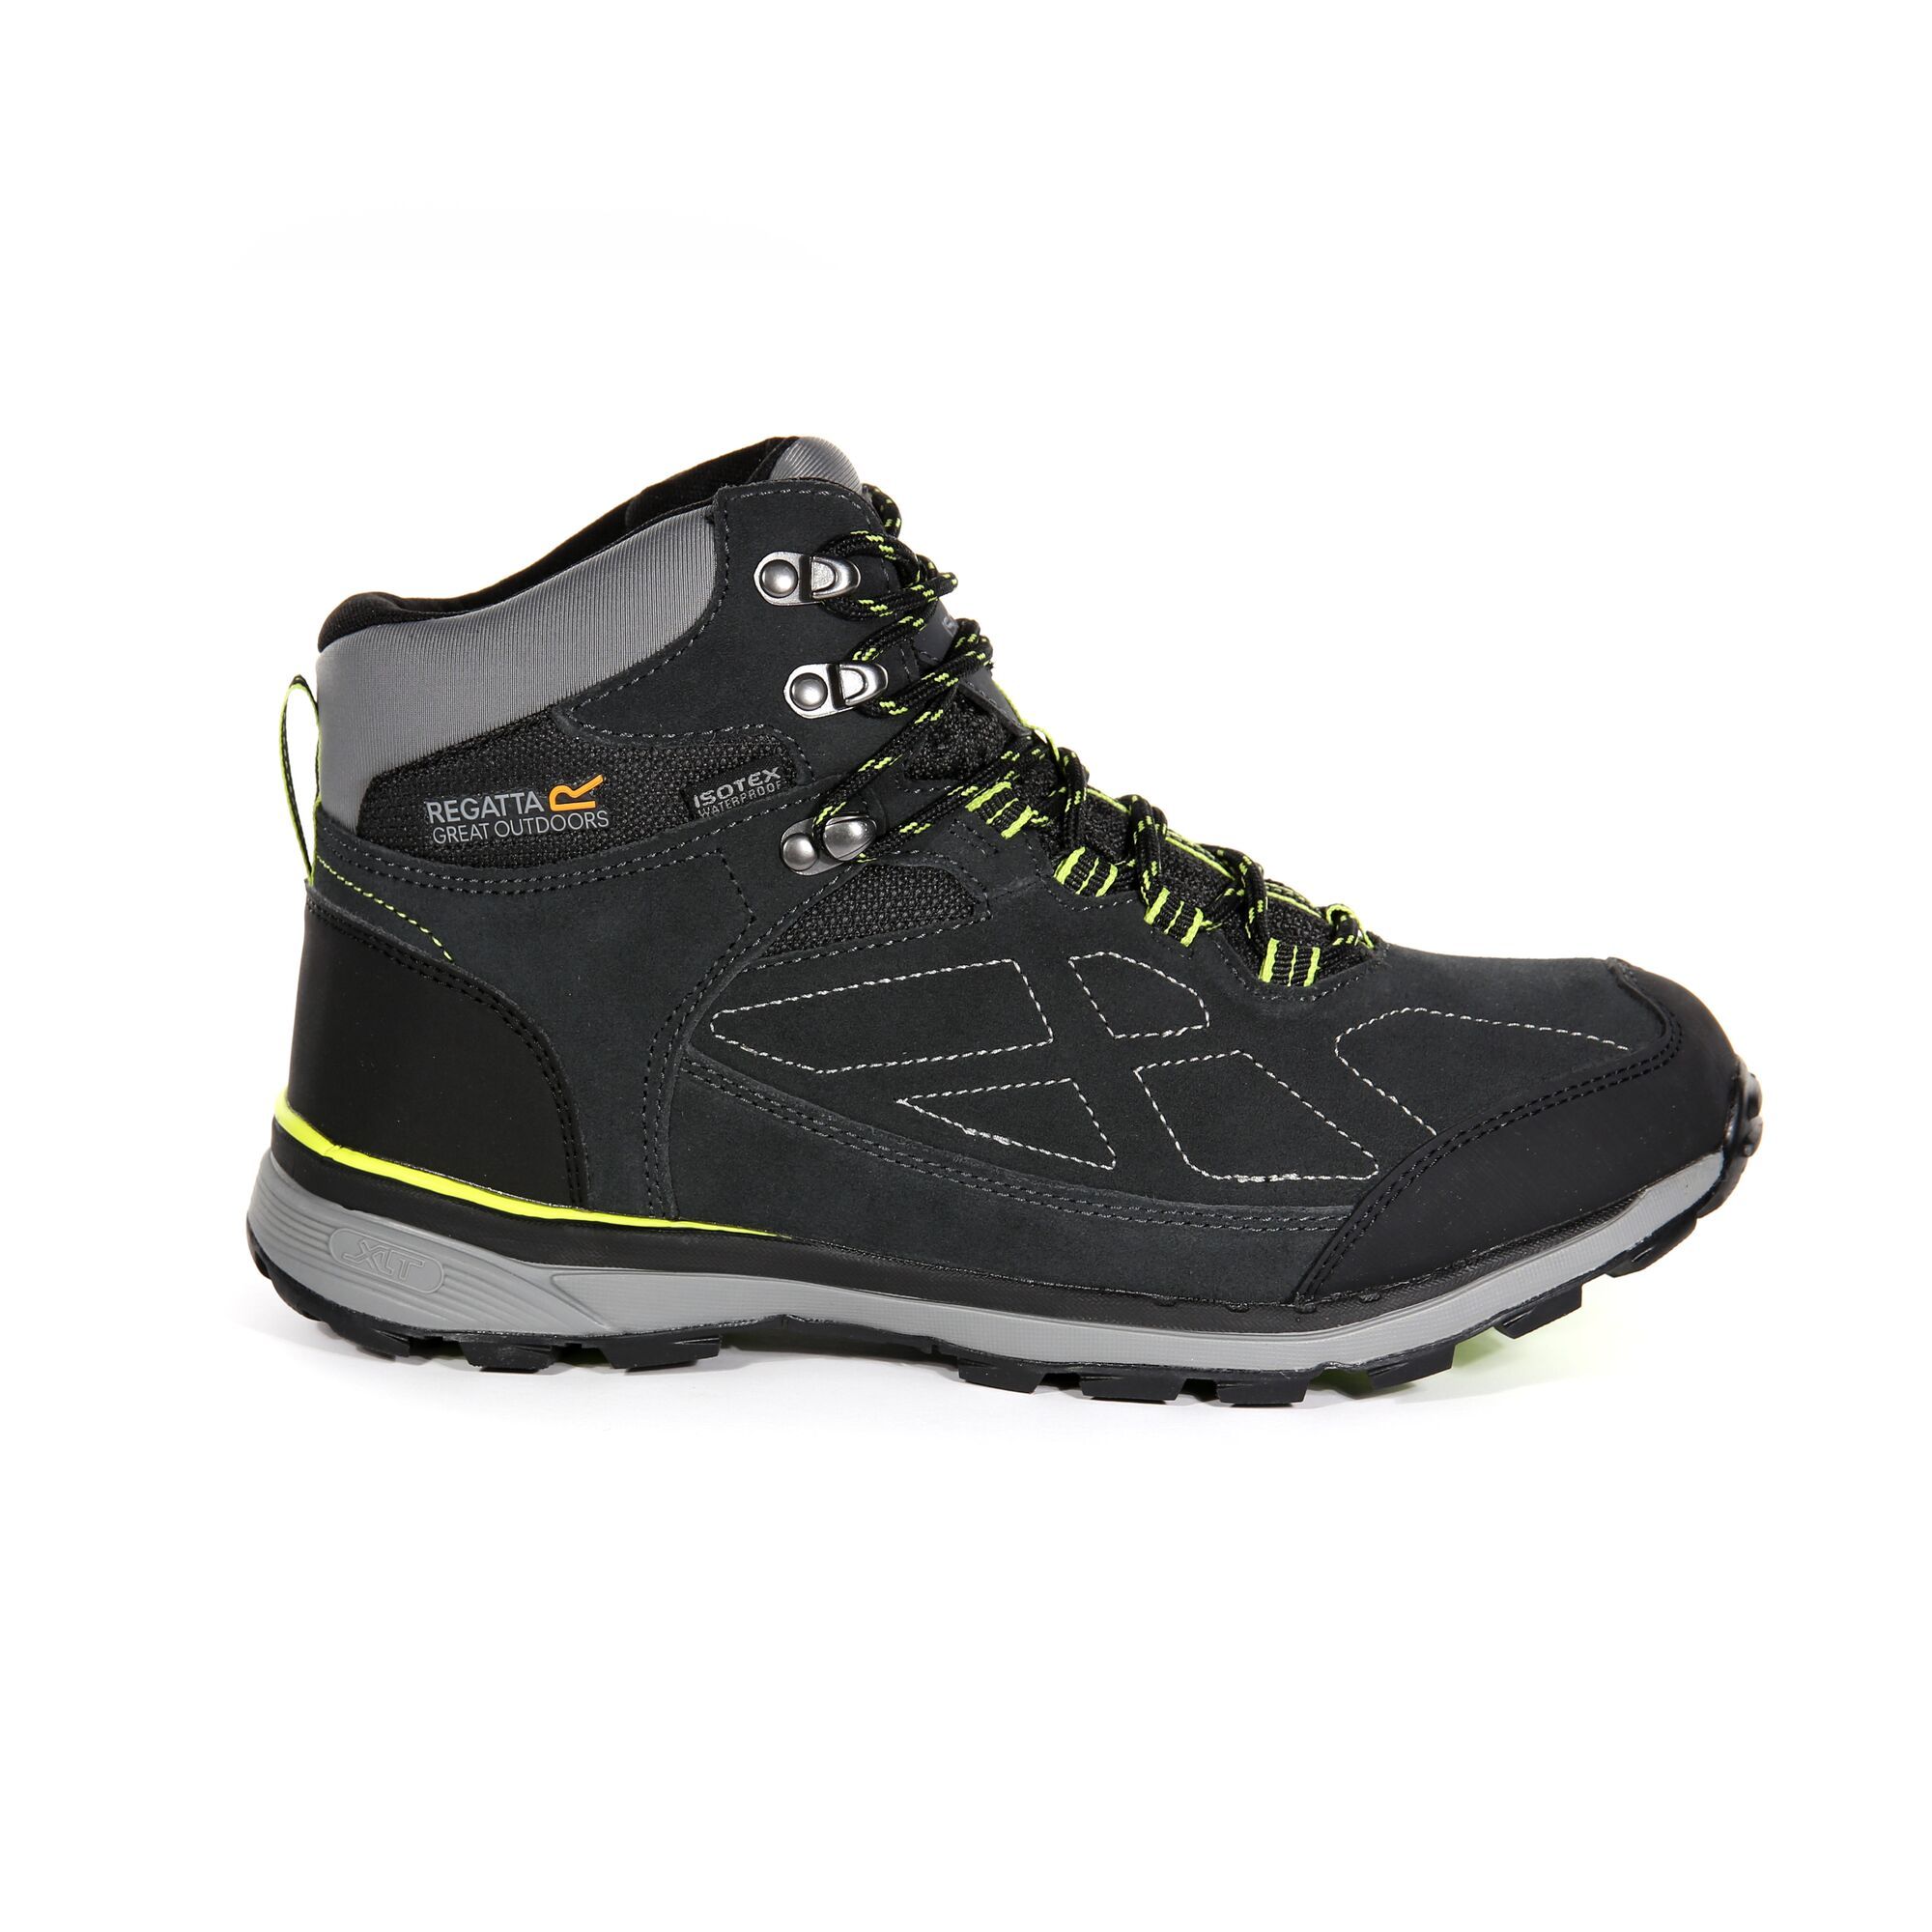 Mens hiking boots made of Isotex waterproof material. Seam sealed with internal membrane bootee liner. Hydropel water resistant technology. Suede and mesh upper. Neoprene collar for added comfort. Ghillie and hardware lacing with locking hook to deliver versatile and secure lacing. Rubber toe and abrasion resistant heel bumper. Moulded EVA comfort footbed. Stabilising shank technology. New XLT sole unit for improved traction and self cleaning. 8% Polyurathane, 10% Rubber, 12% Polyester, 70% Leather (Textile).